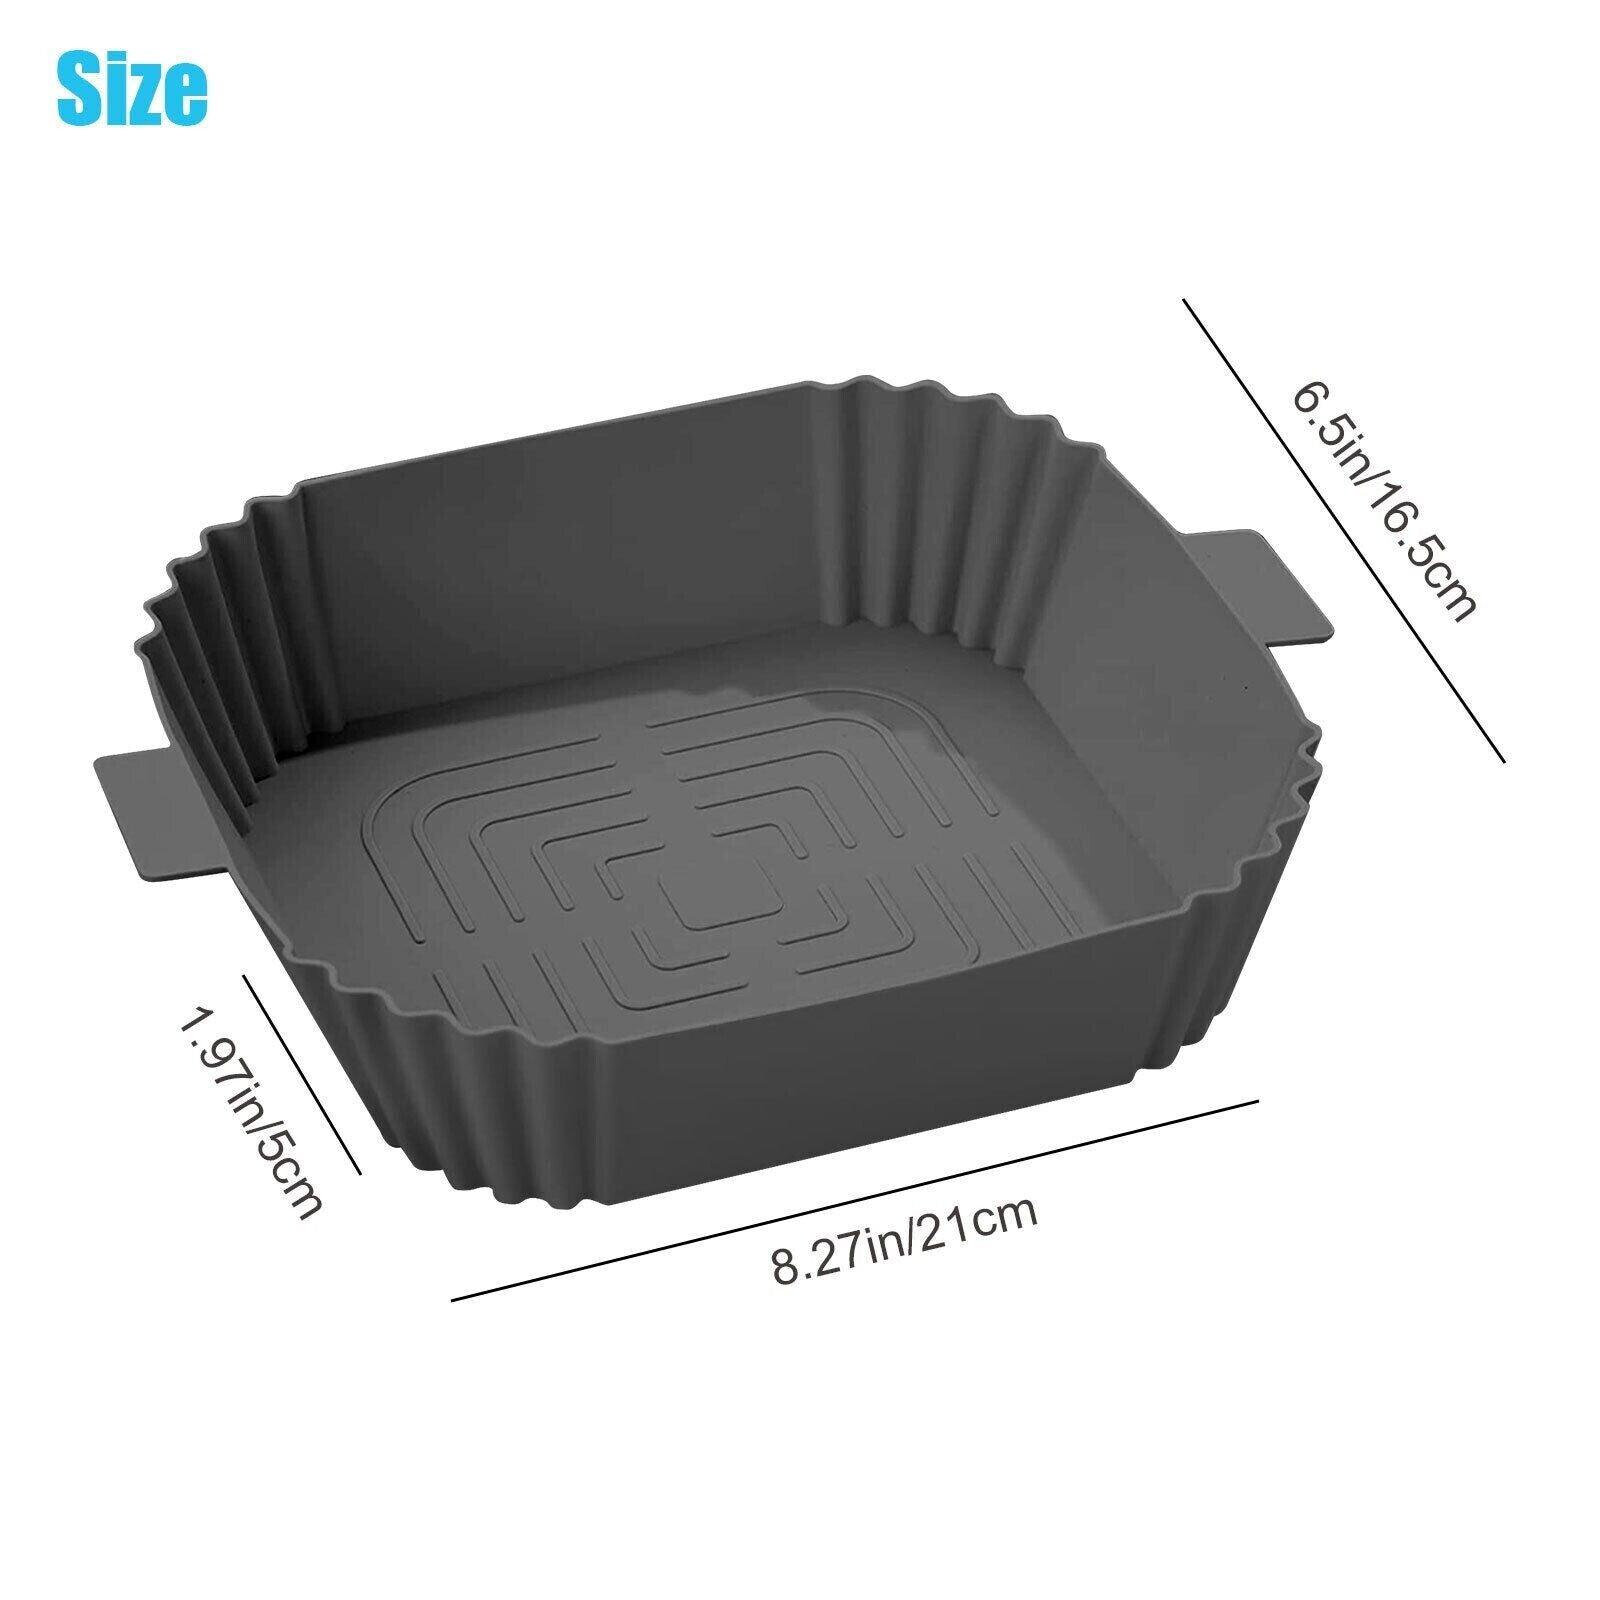 Air Fryer Silicone Pot Basket Liners Non-Stick Safe Oven Baking Tray Accessories - Nioor